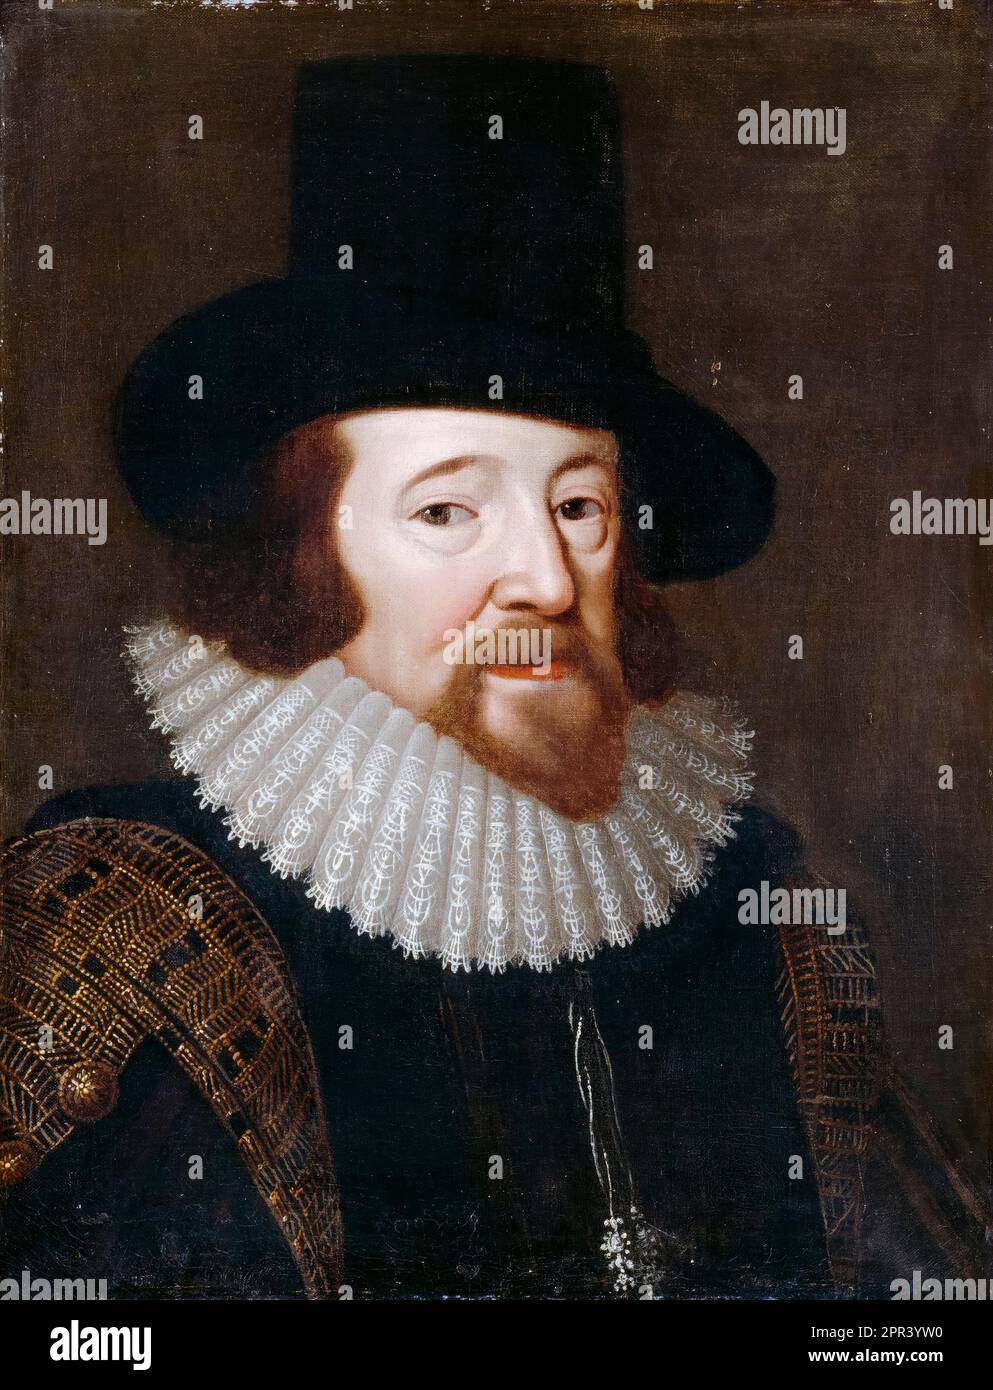 Sir Francis Bacon (1561-1626), English philosopher and statesman, portrait painting in oil on canvas, circa 1622 Stock Photo